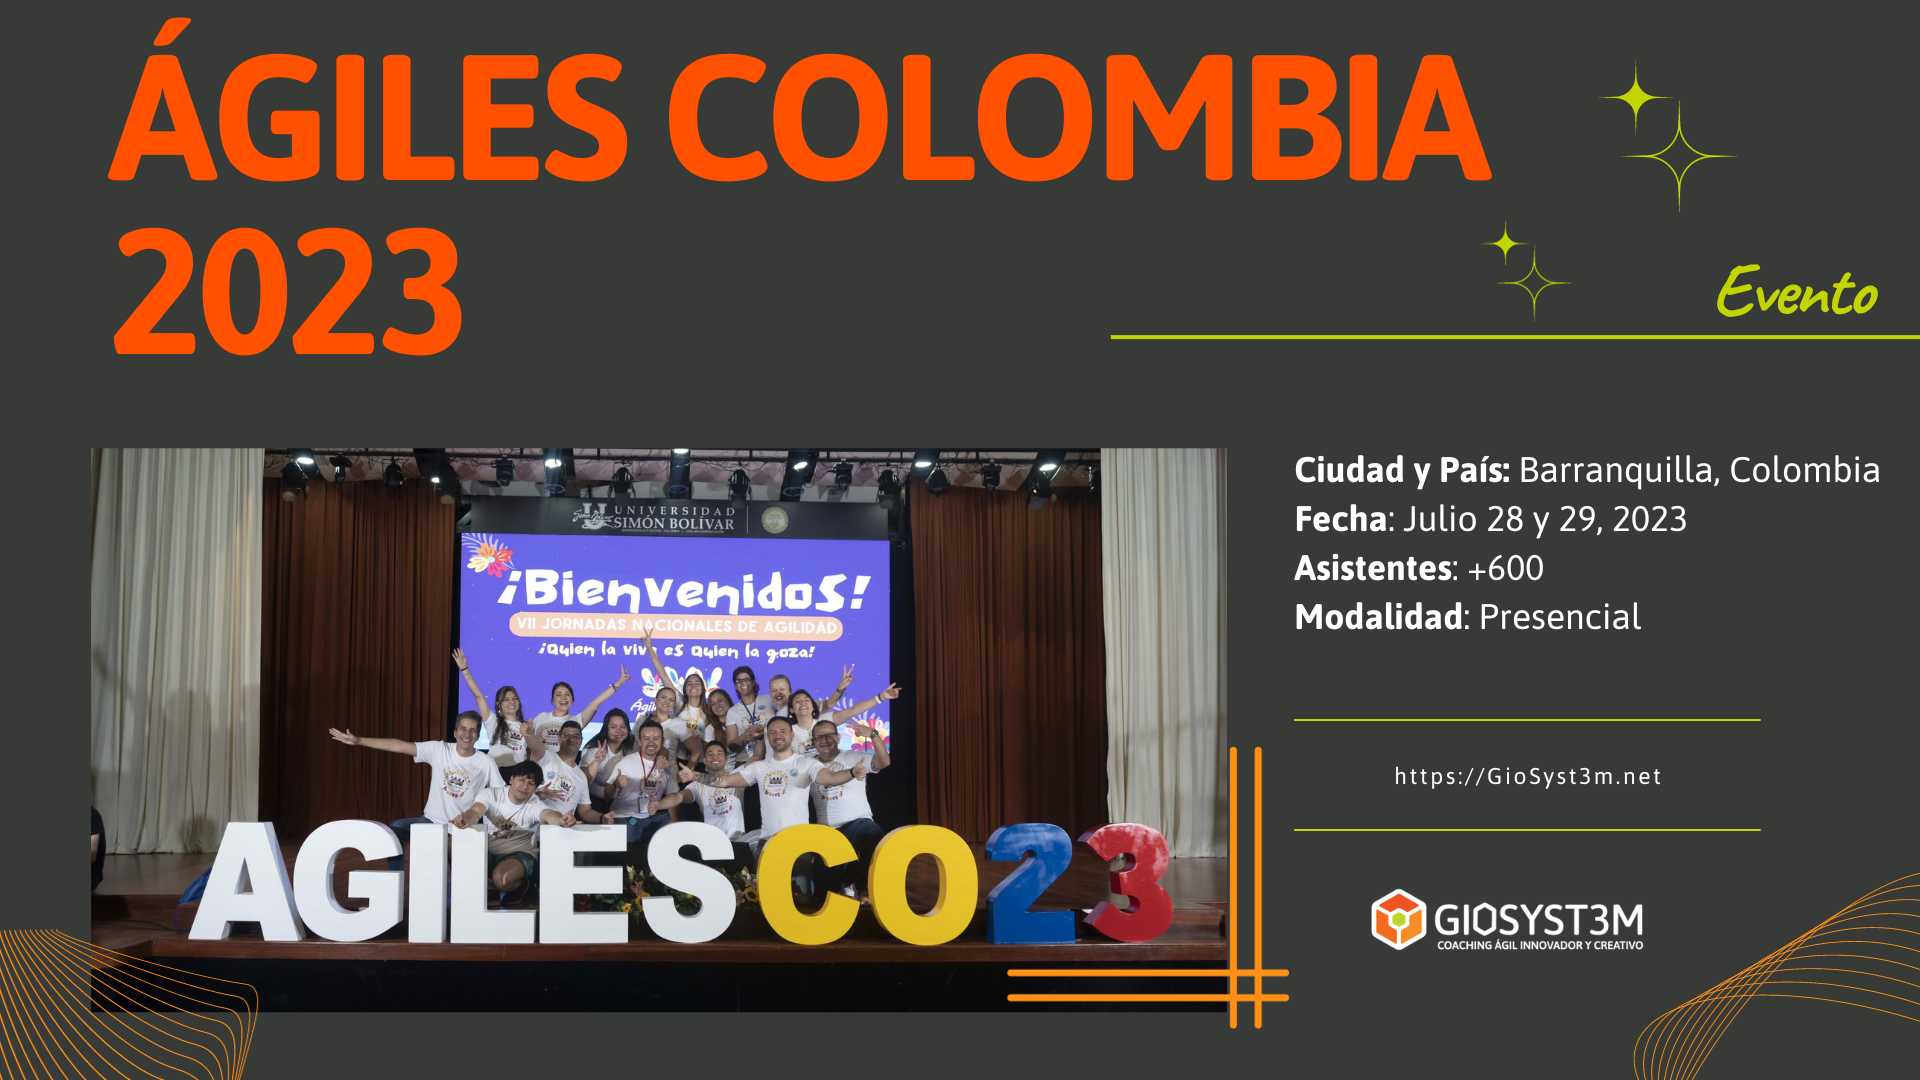 Agiles Colombia 2023 - GioSyst3m